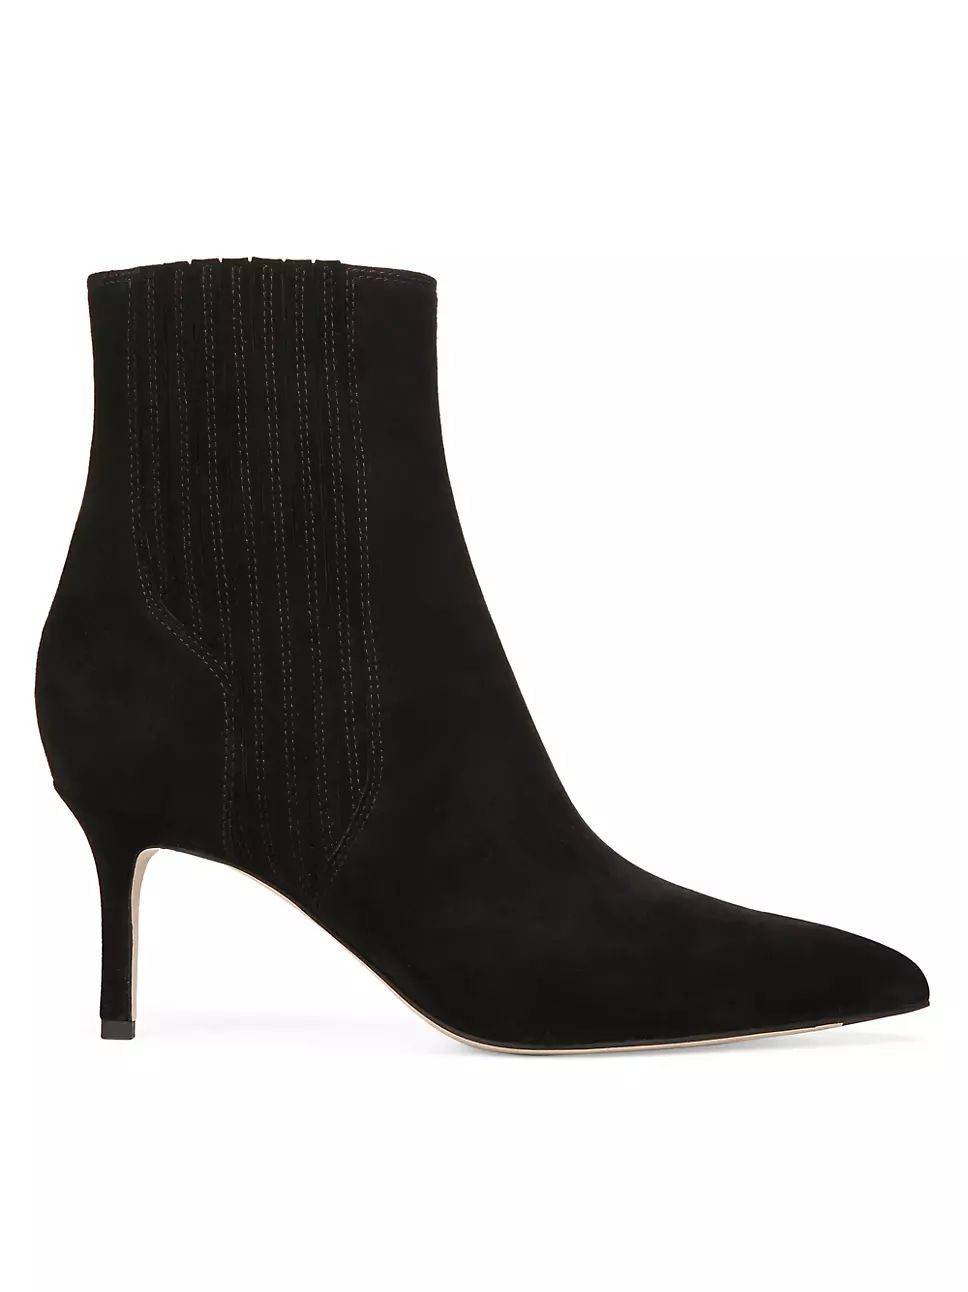 Lisa 70MM Suede Ankle Boots | Saks Fifth Avenue